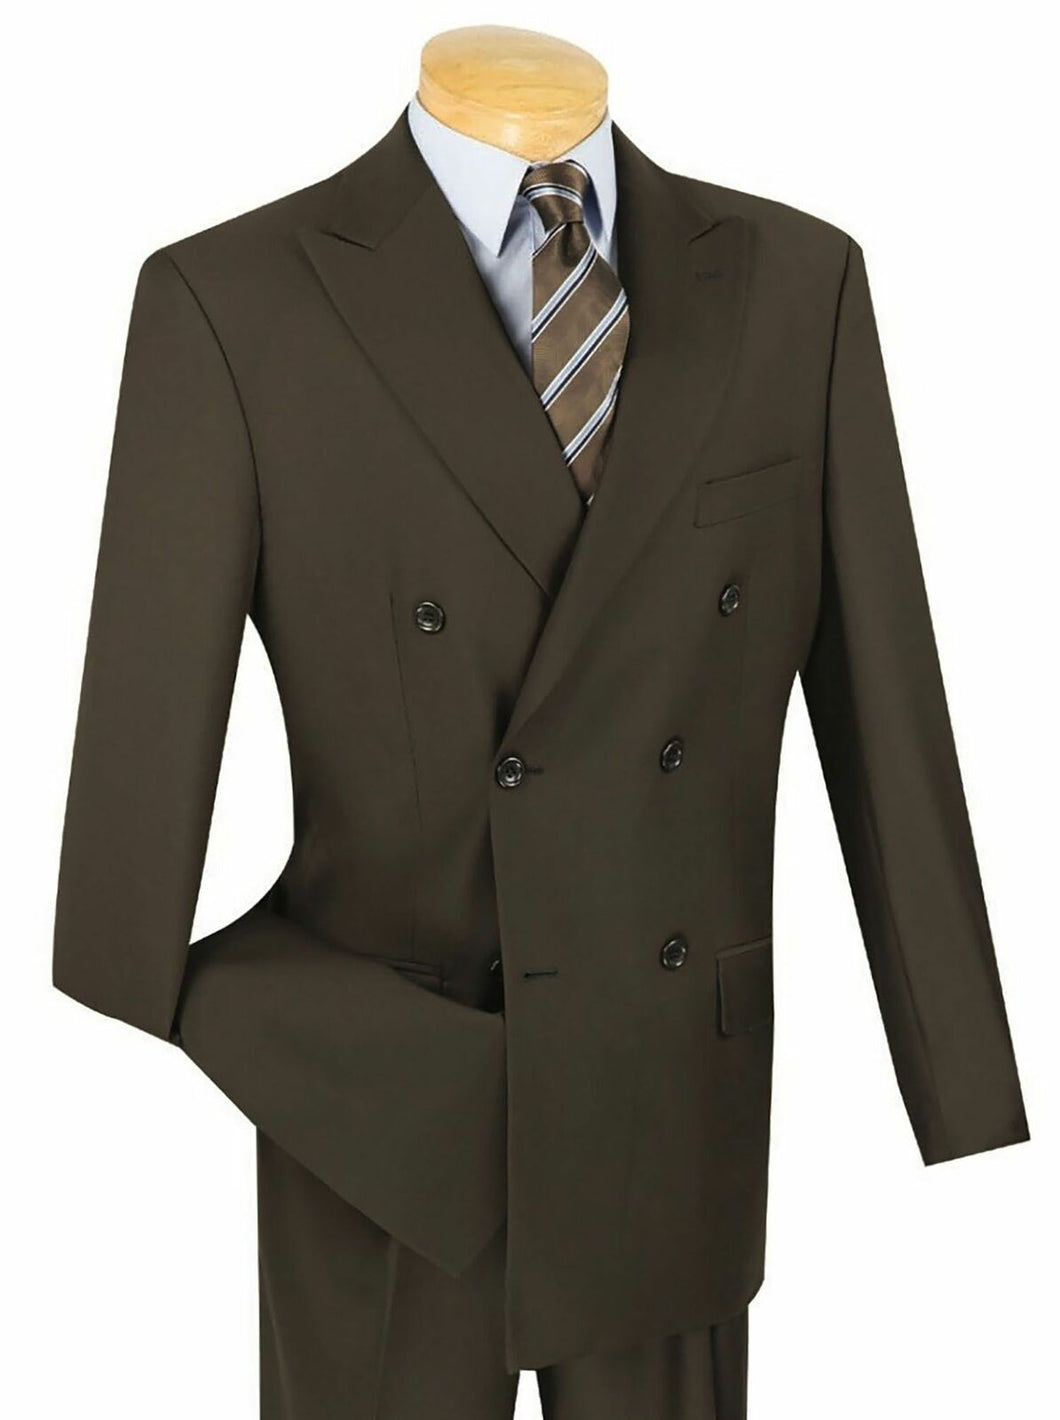 Mens Double Breasted Brown Suit Vinci DC900-1